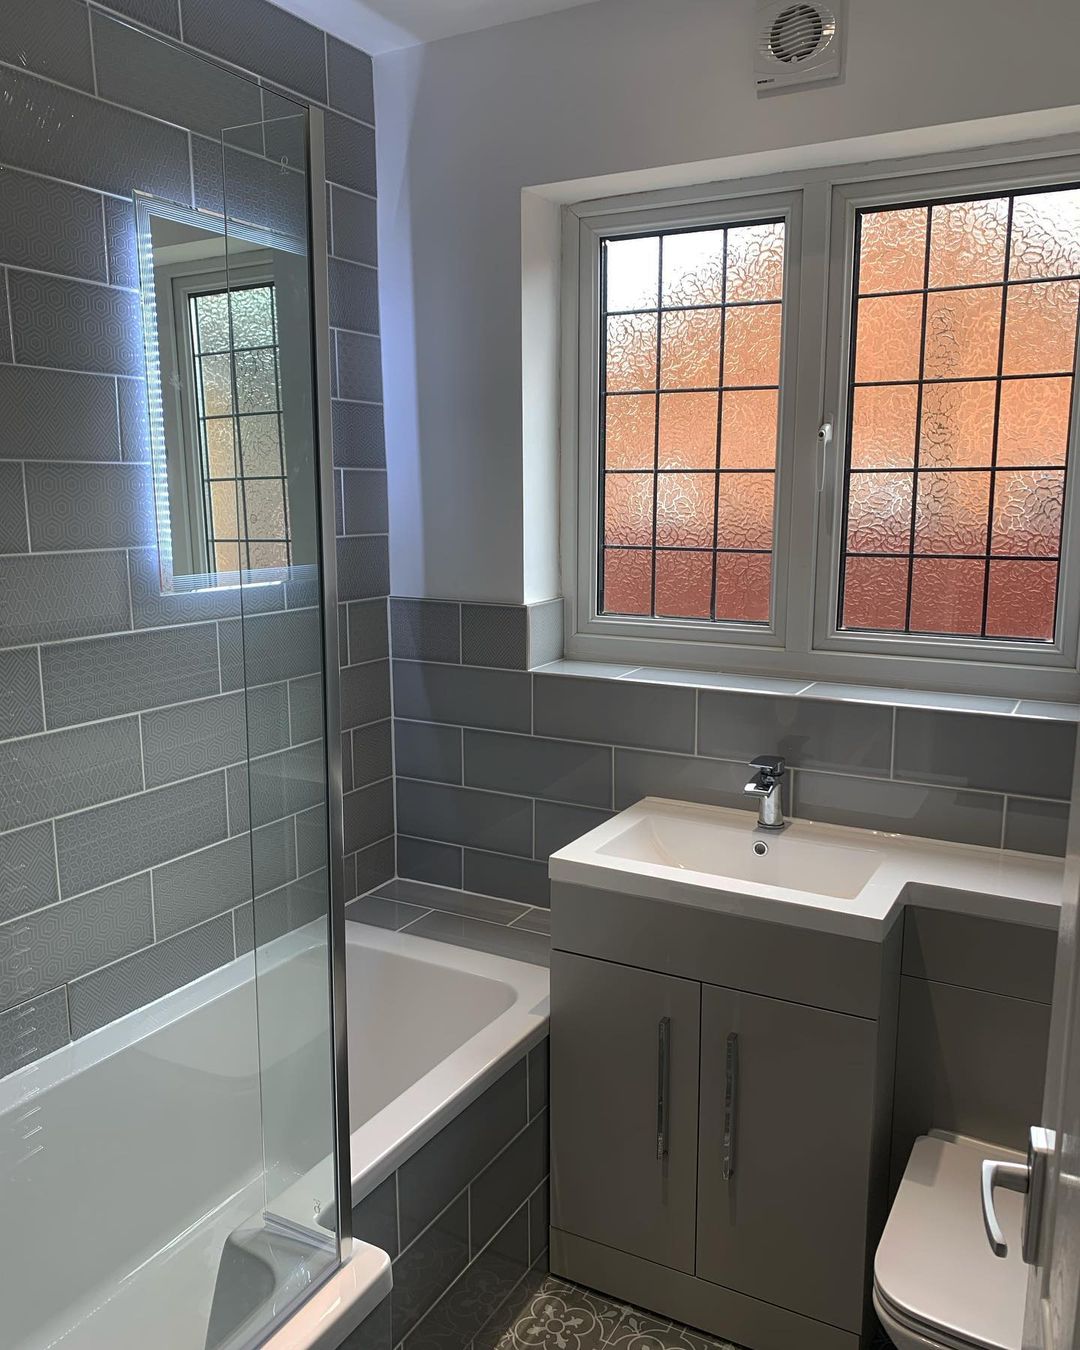 We can project manage your new bathroom installation from start to finish, you will have peace of mind knowing our team of trades work hand in hand to bring your vision to life. Contact us today!
Full bathroom installations
Full wet room installations
Shower Rooms
En-suites